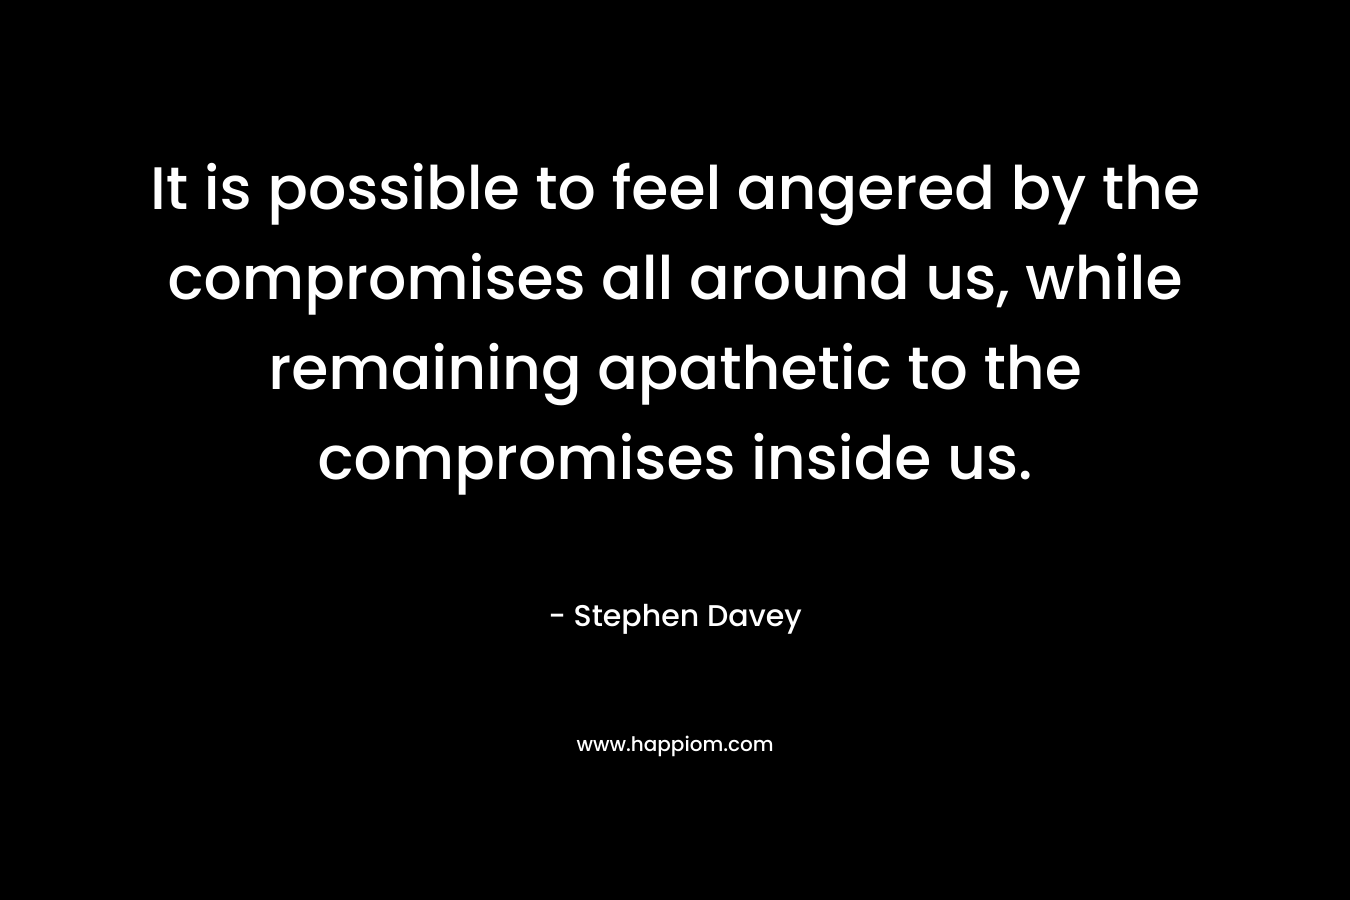 It is possible to feel angered by the compromises all around us, while remaining apathetic to the compromises inside us.